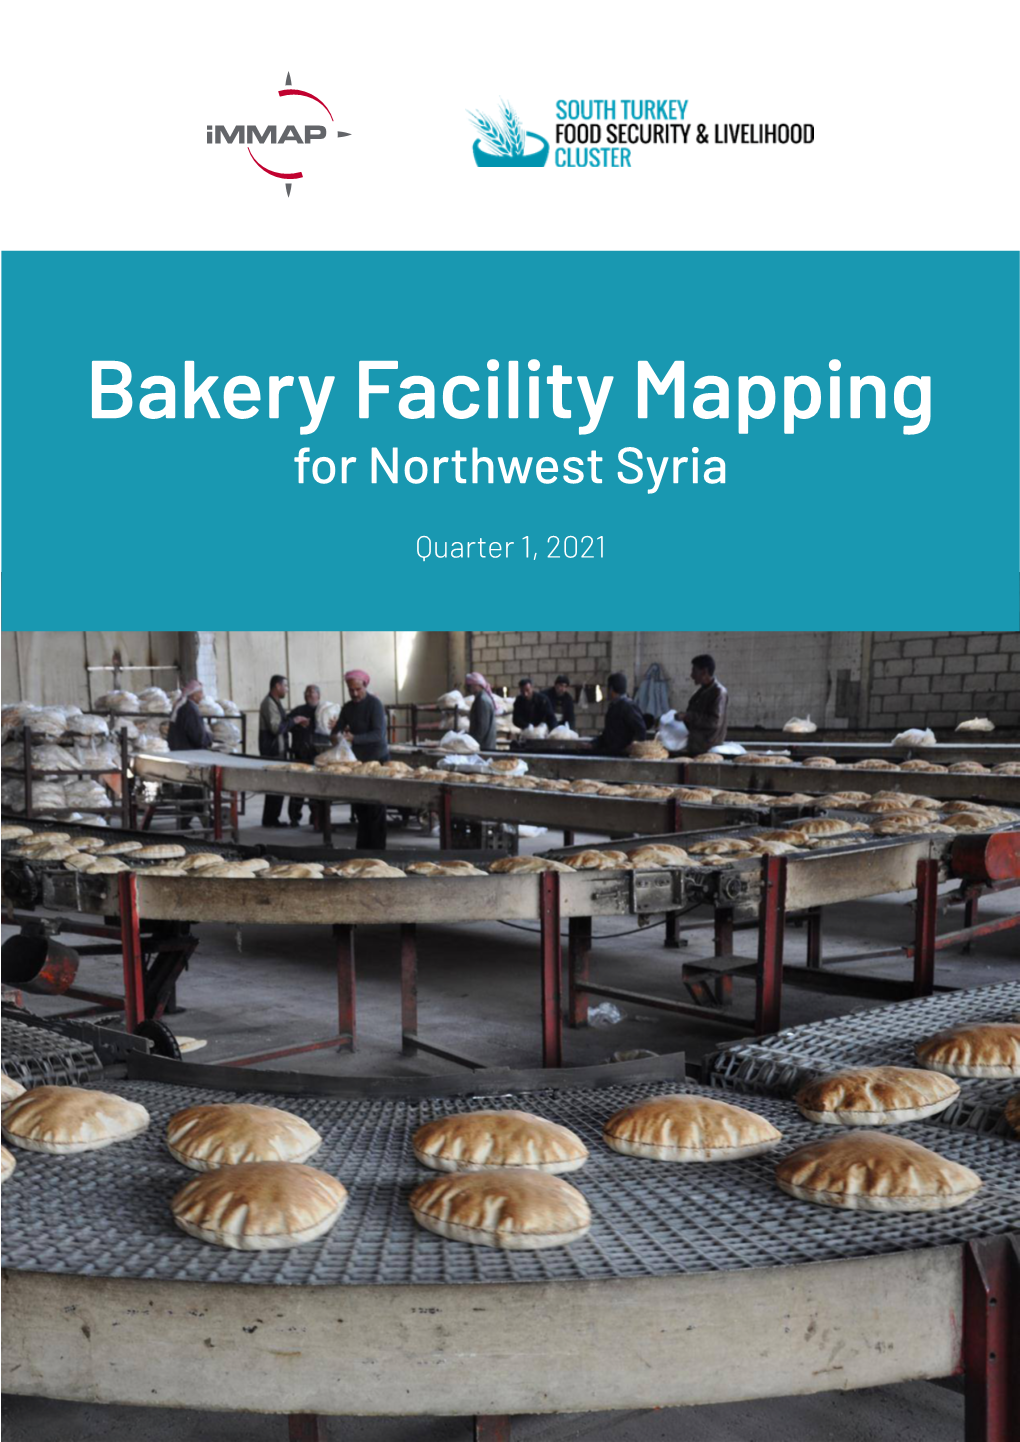 Bakery Facility Mapping for Northwest Syria